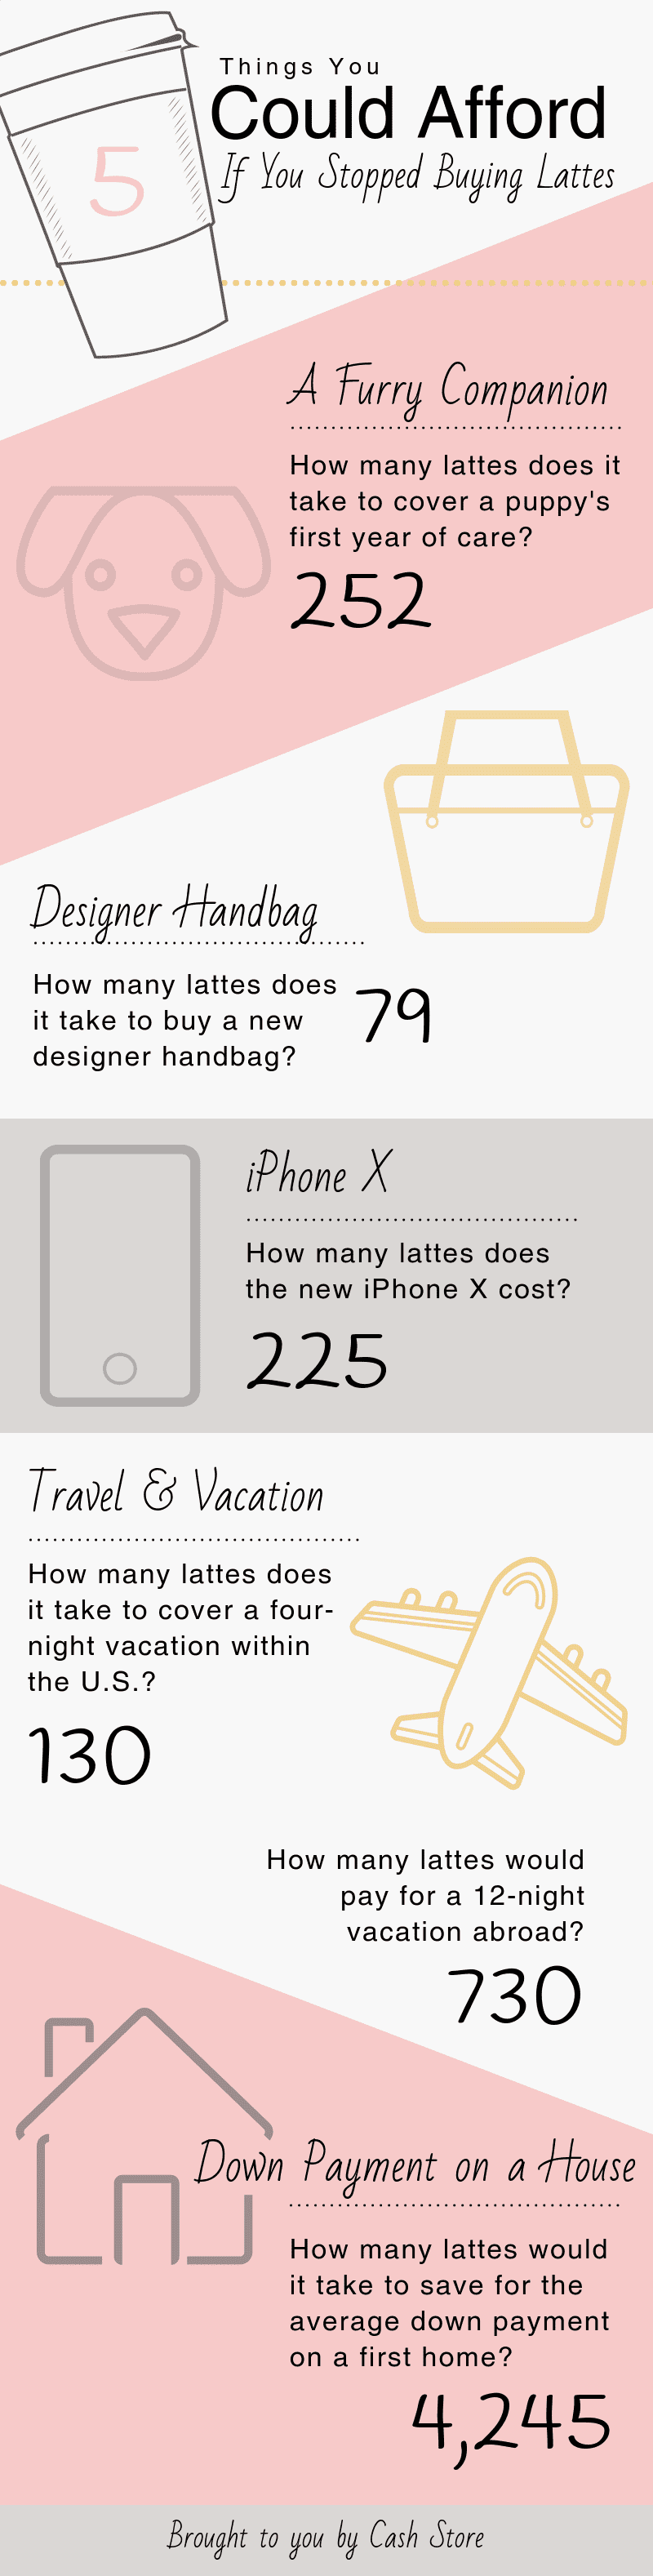 Five things you could afford if you stopped buying lattes infographic